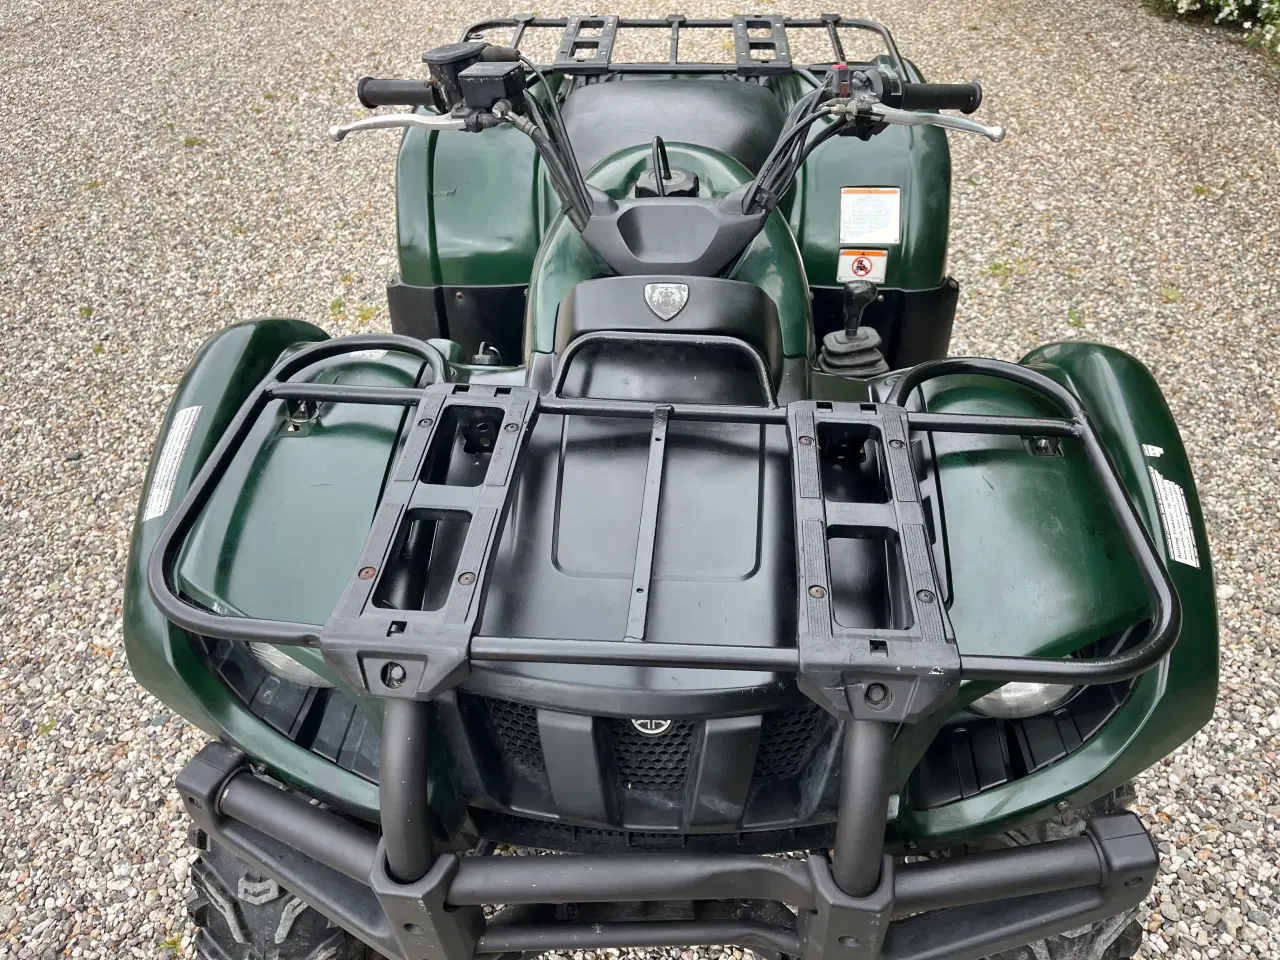 Billede 7 - Yamaha Grizzly 660